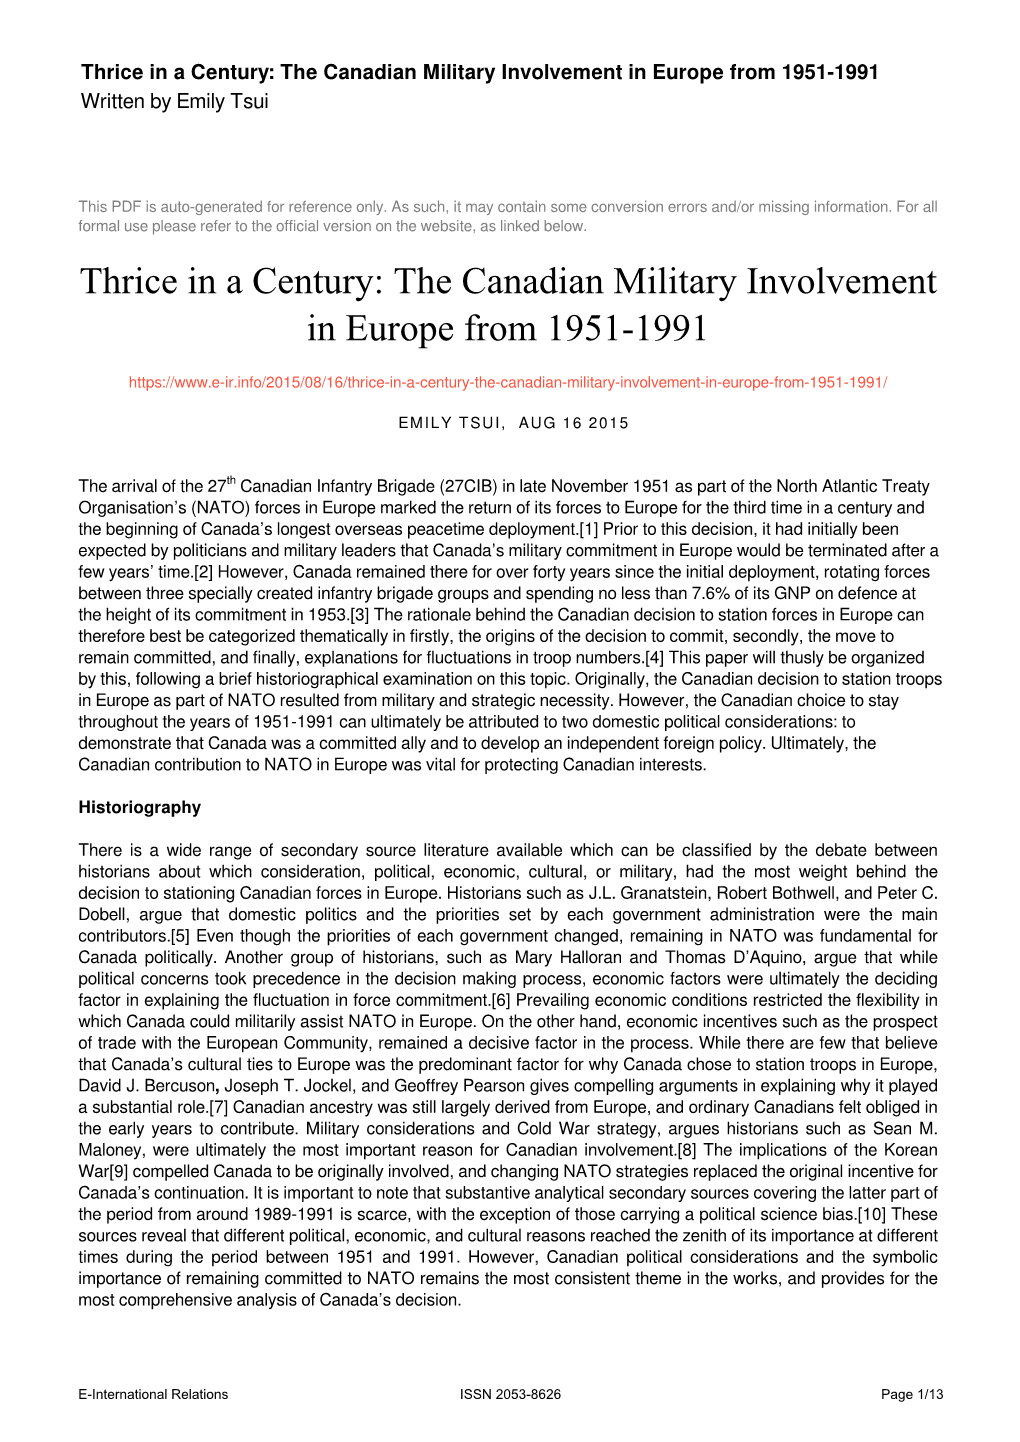 The Canadian Military Involvement in Europe from 1951-1991 Written by Emily Tsui